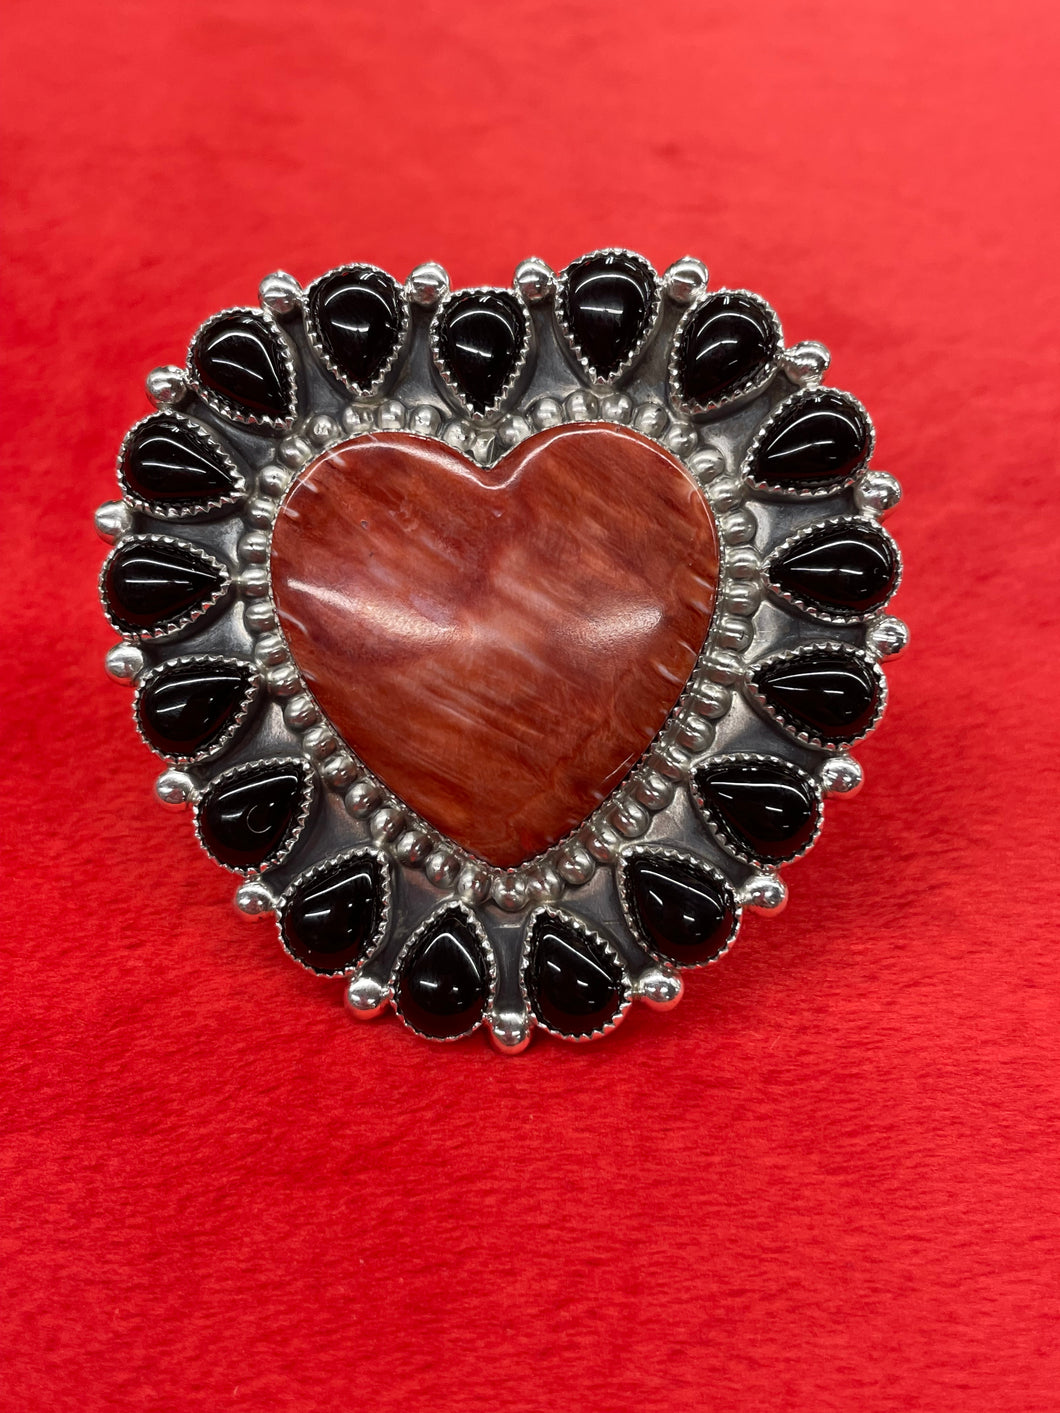 Onyx and Coral Heart Ring